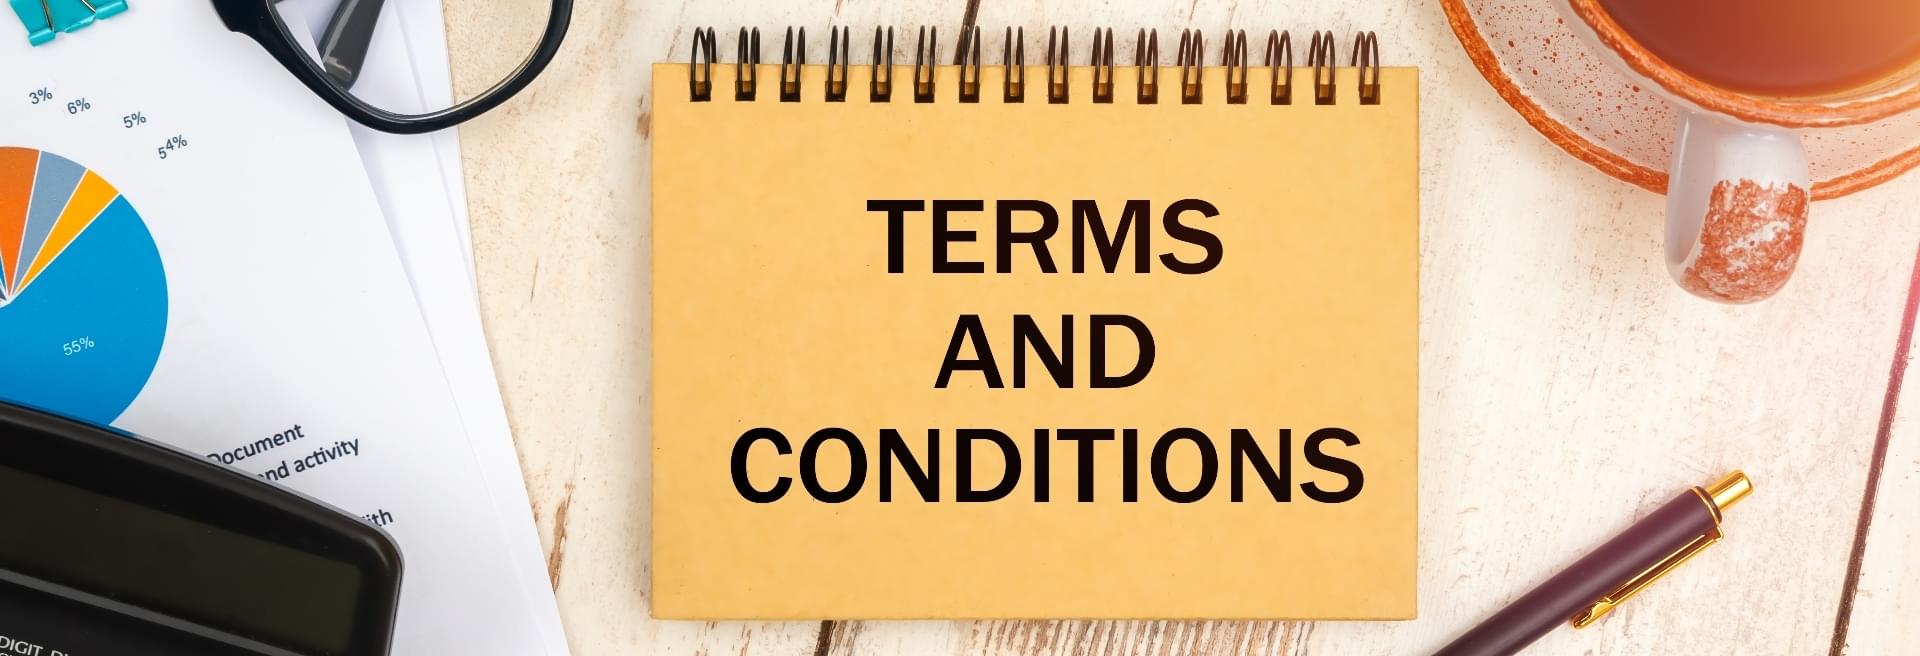 Terms of use and conditions of website - Beam Bum